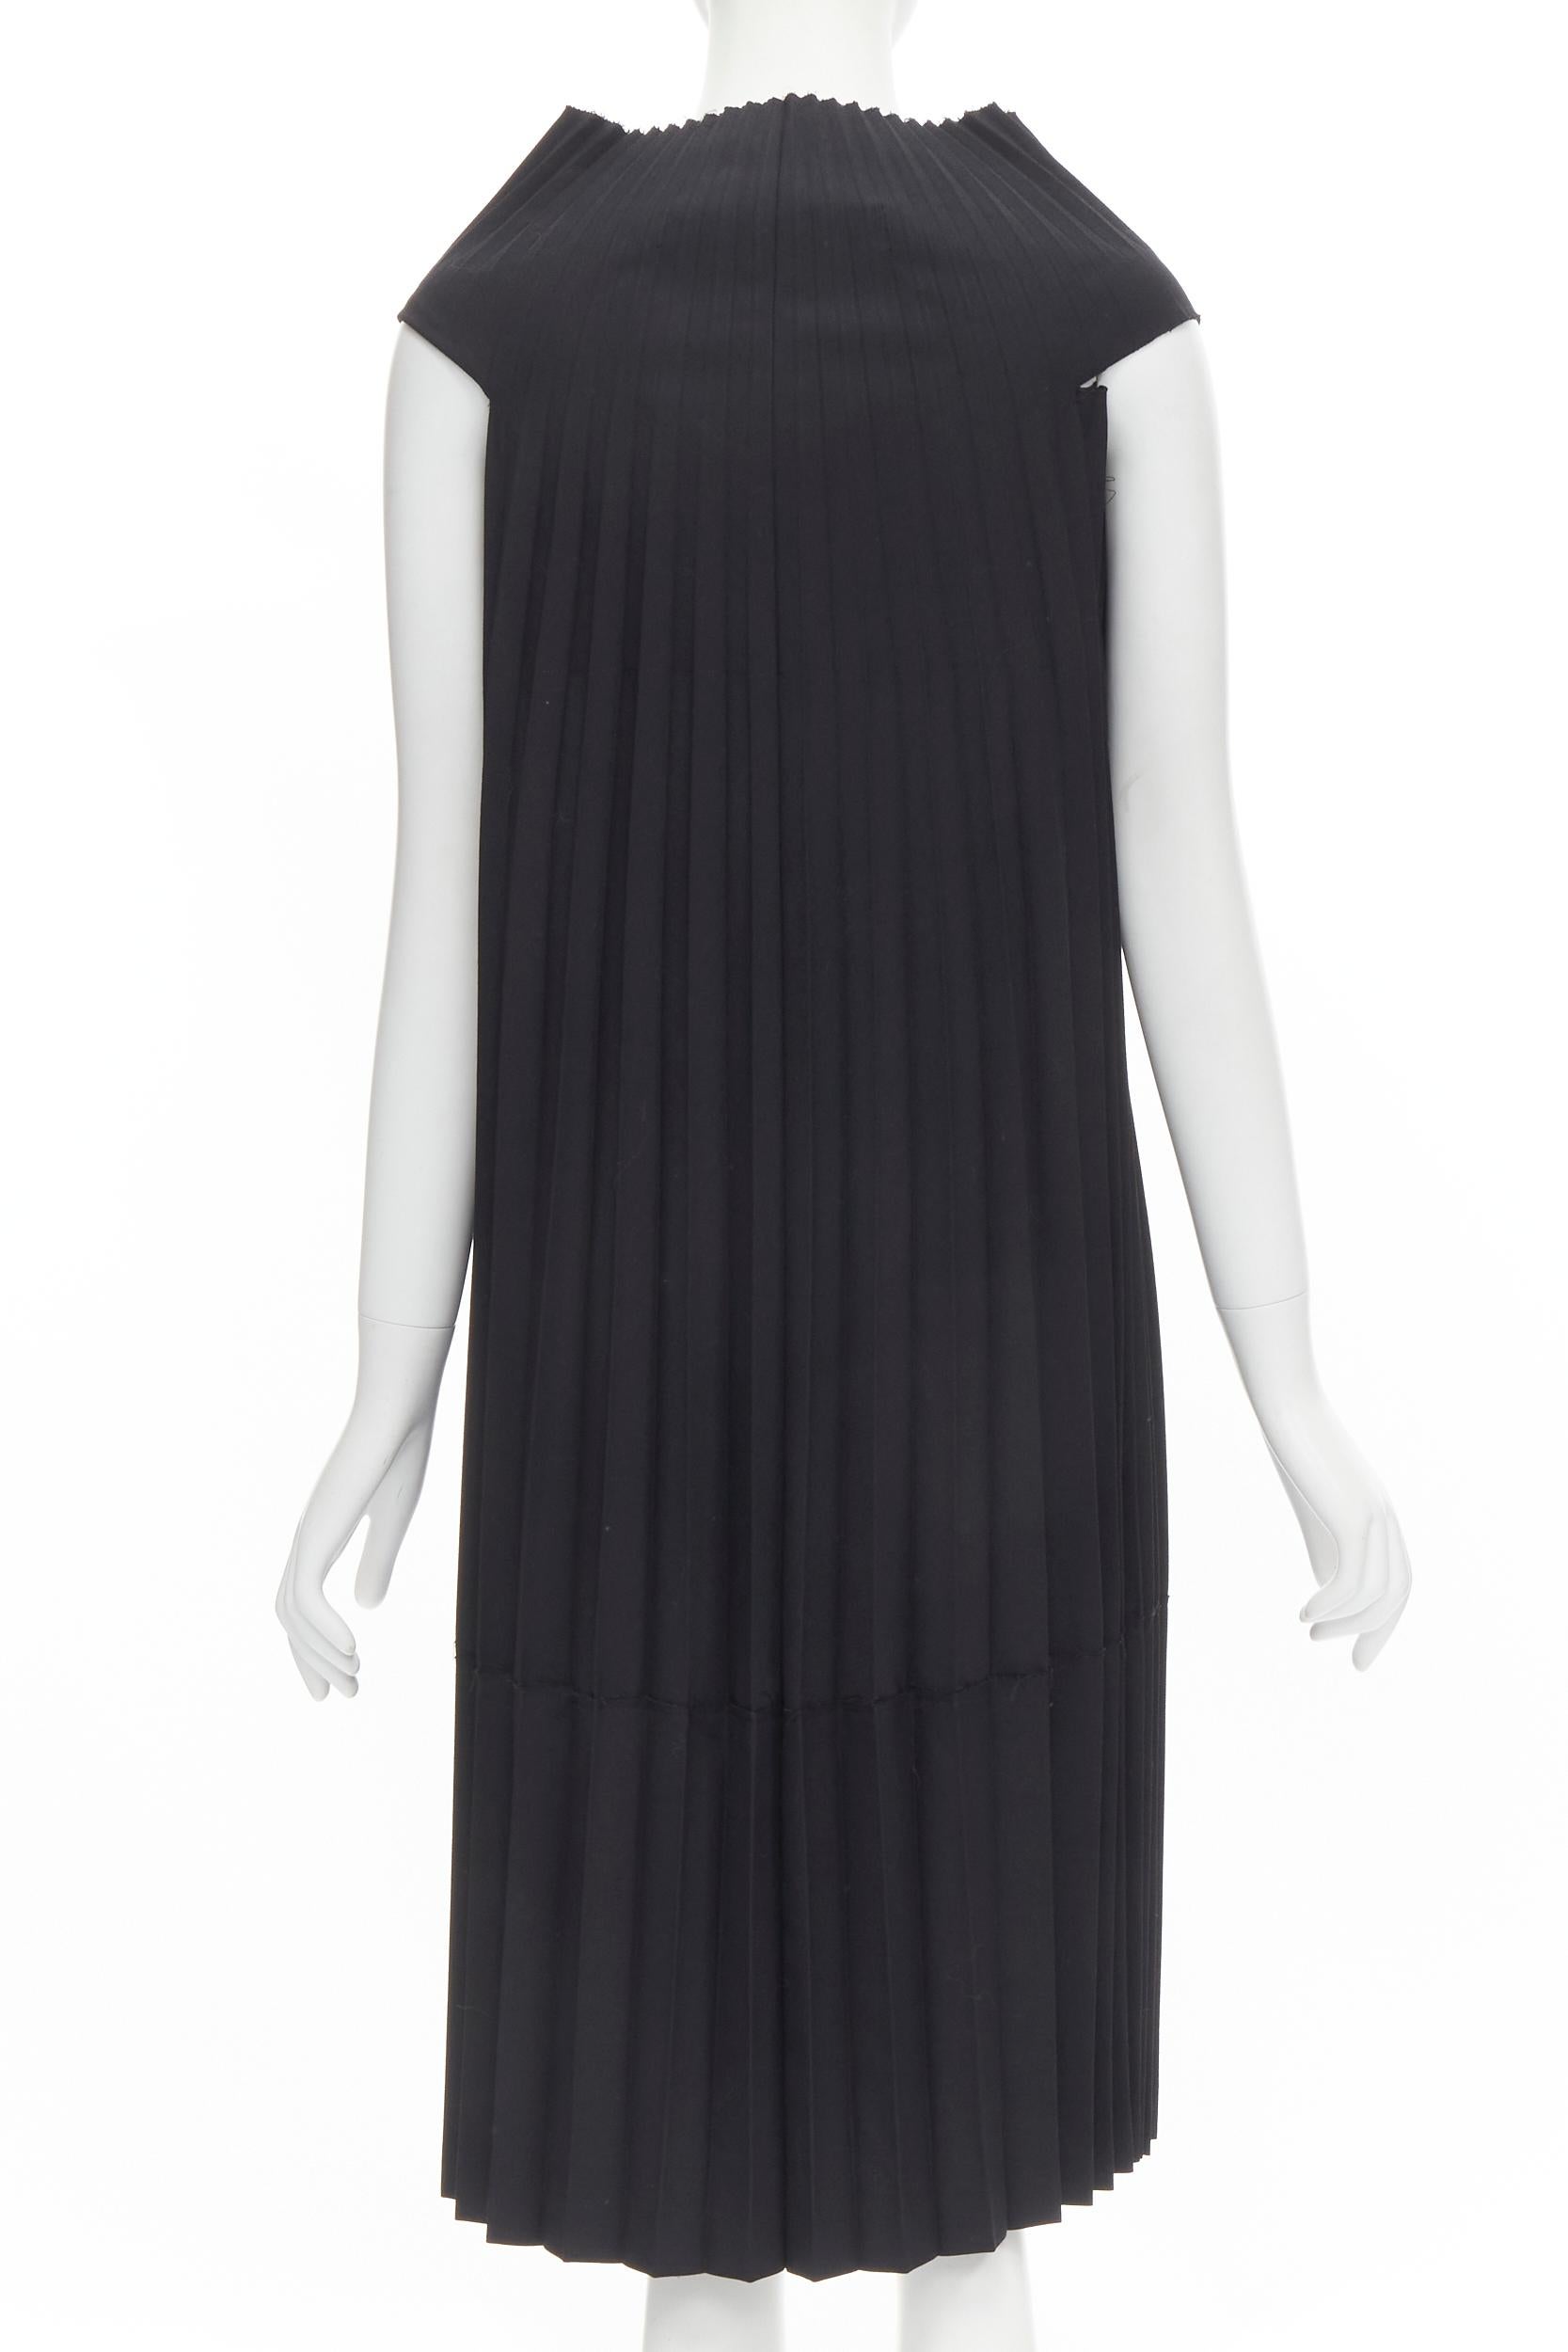 JUNYA WATANABE 1998 black Accordion pleated raw edge deconstructed dress S In Excellent Condition For Sale In Hong Kong, NT